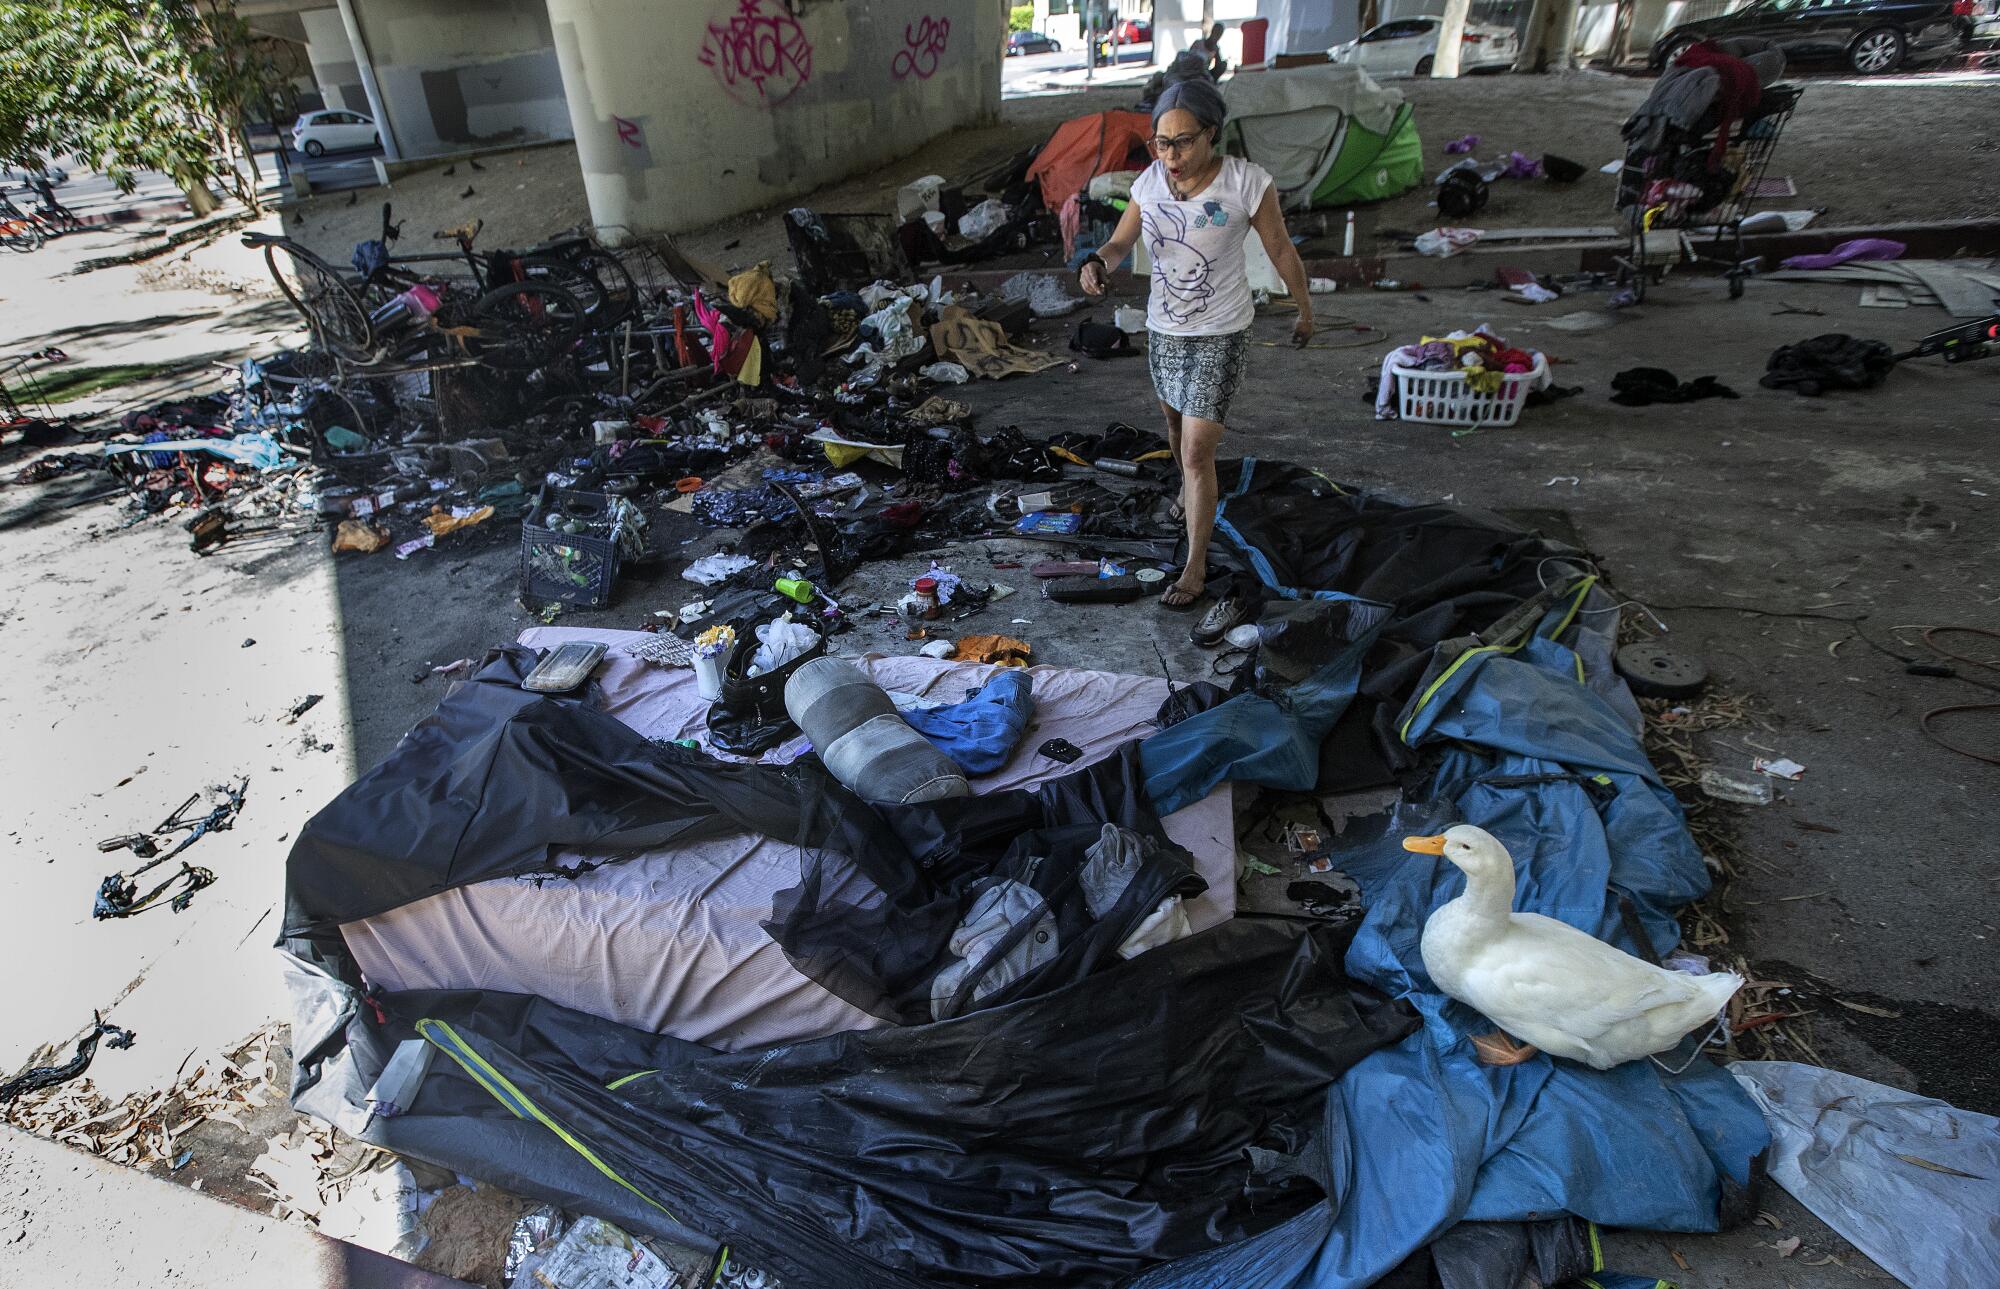 A woman walks through burned tents in downtown Los Angeles.